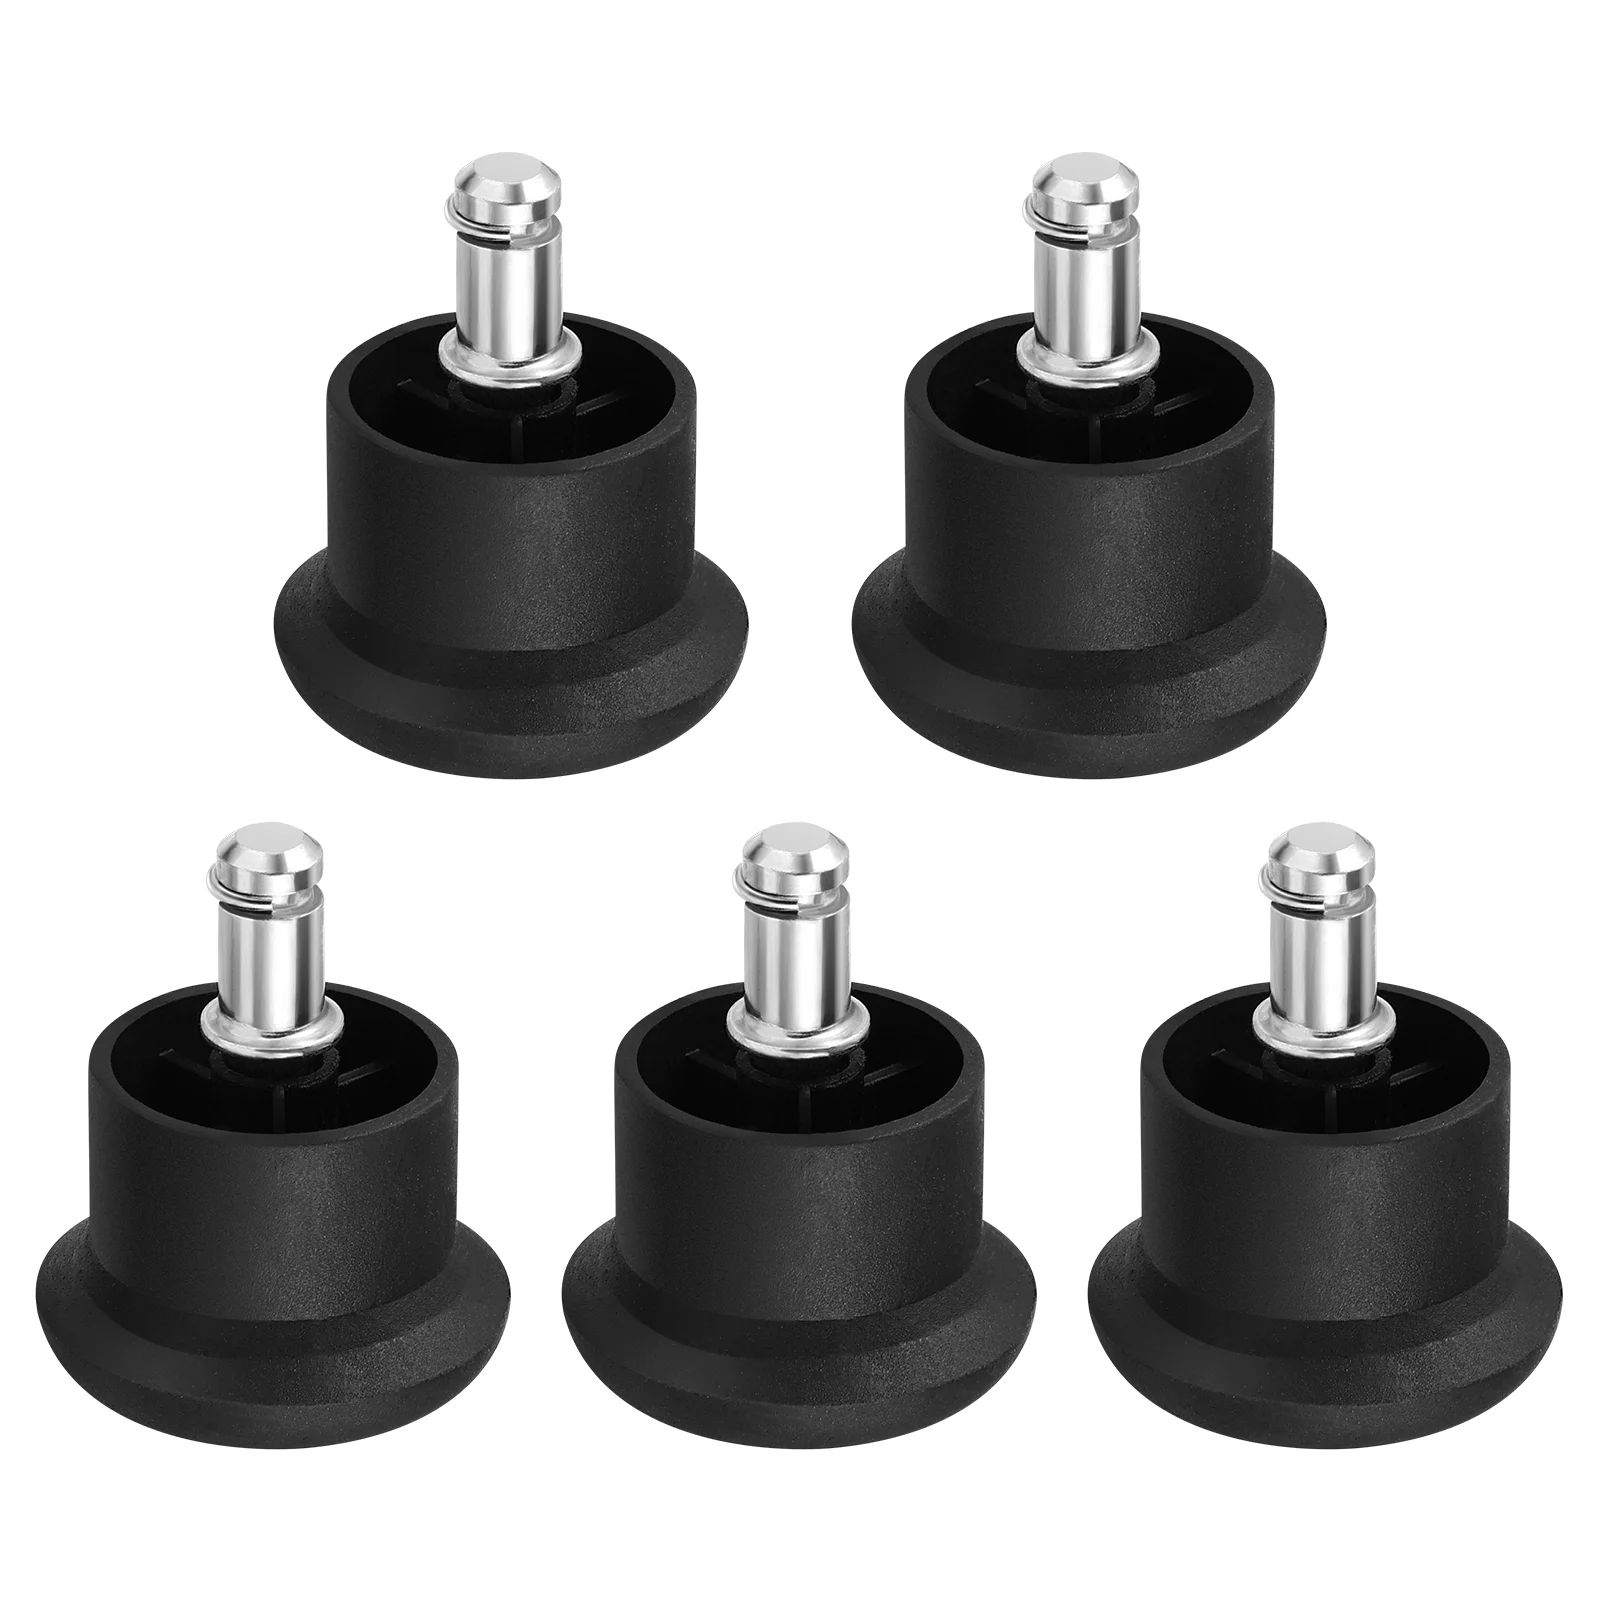 

Chair Wheels Casters Office Stopper Caster Glides Fixed Chairs Carpet Wheel Castors Accessories Foot Desk Stationary Heavy Duty